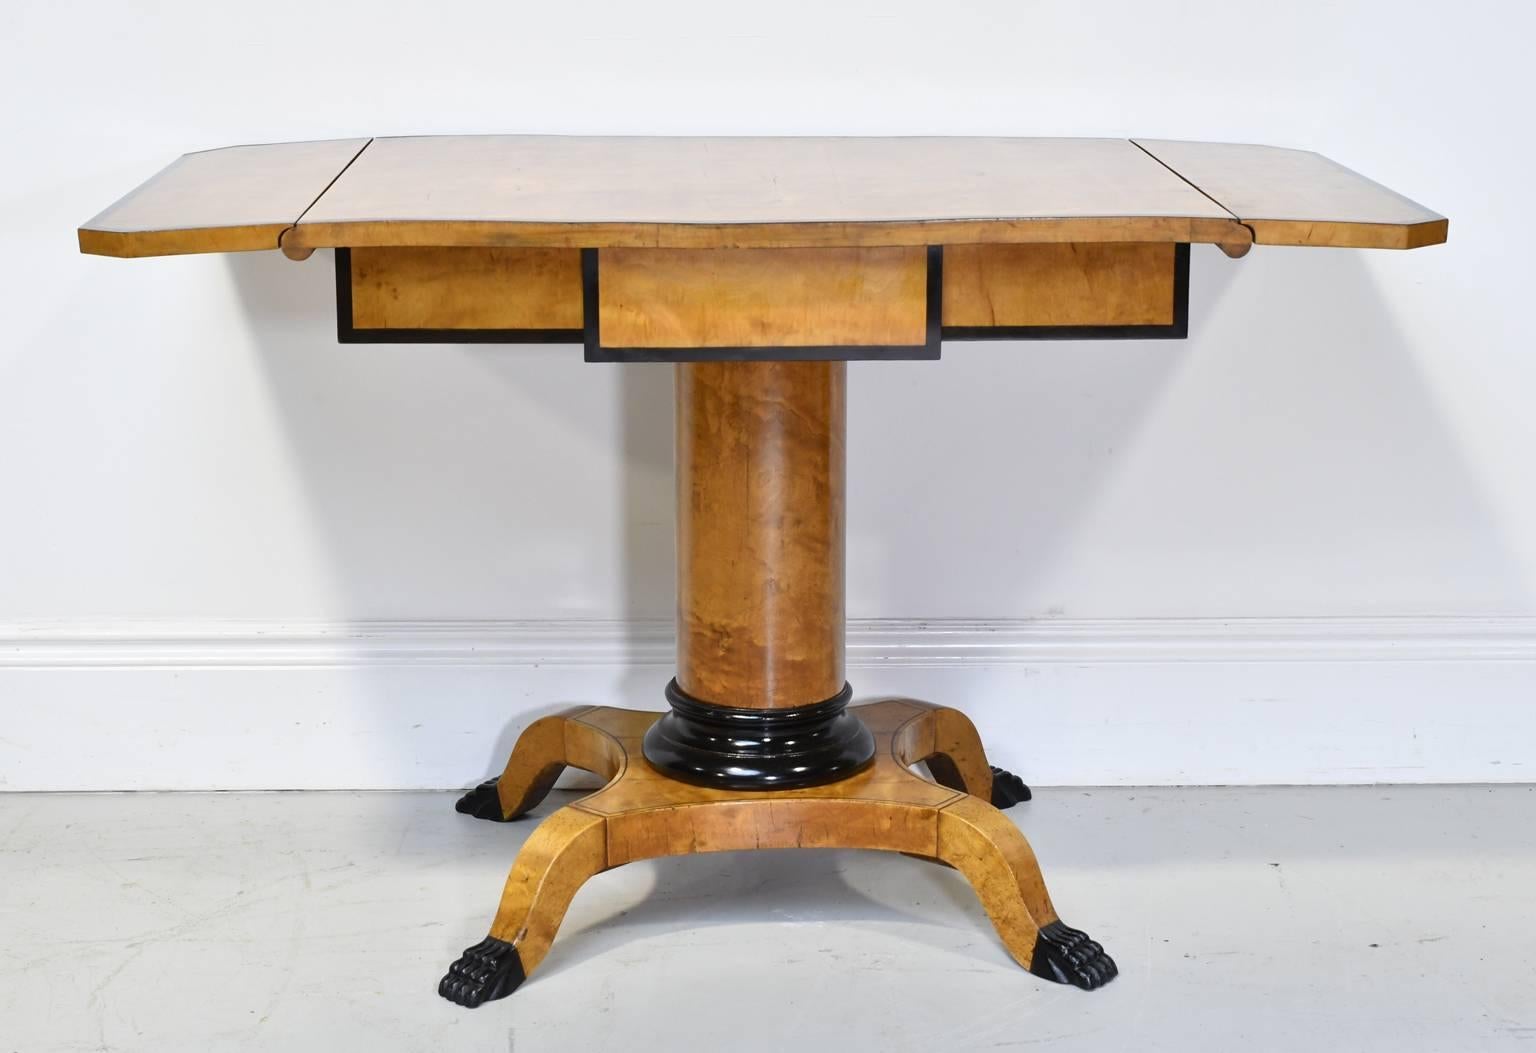 A handsome and contemporary looking Biedermeier desk or salon table from the reign of Karl Johan of Sweden. Top has drop leaves extending the top to 47 1/4